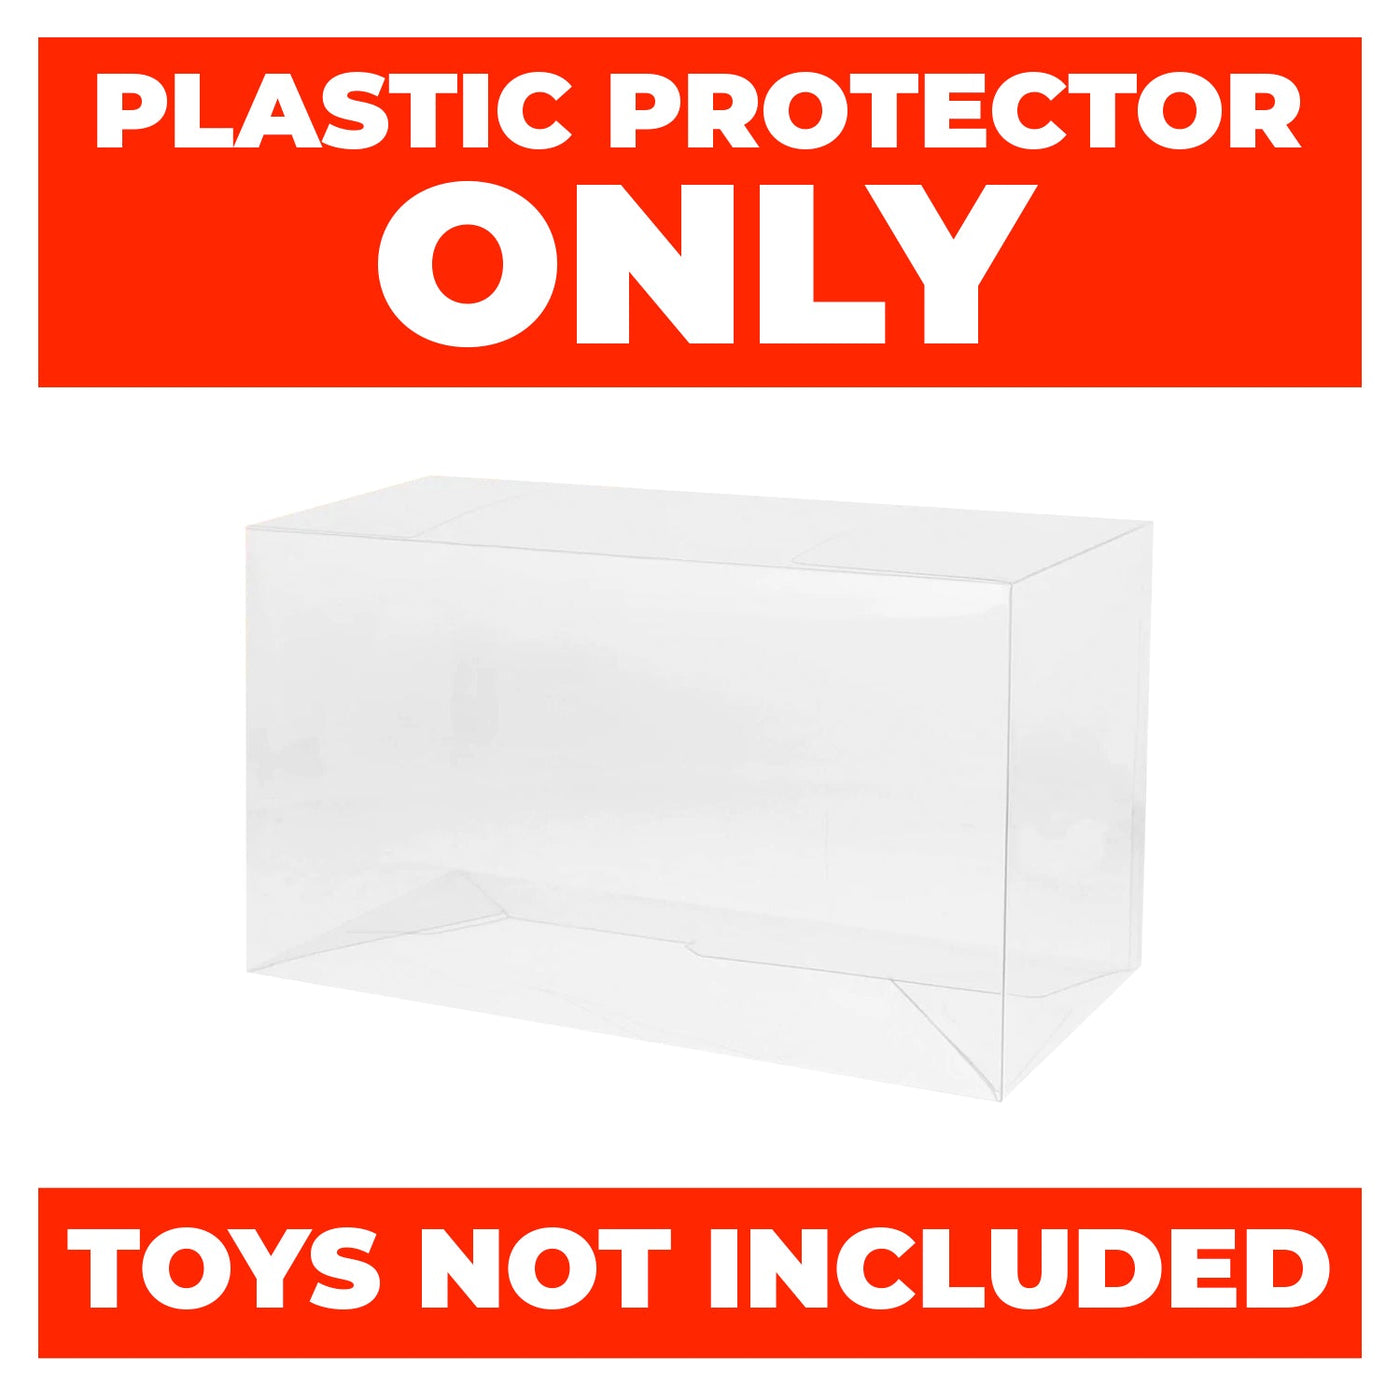 display geek best funko pop protectors thick strong uv scratch flat top stack vinyl   4 inch standard   plastic shield vaulted eco armor fits collect protect display case kollector protector